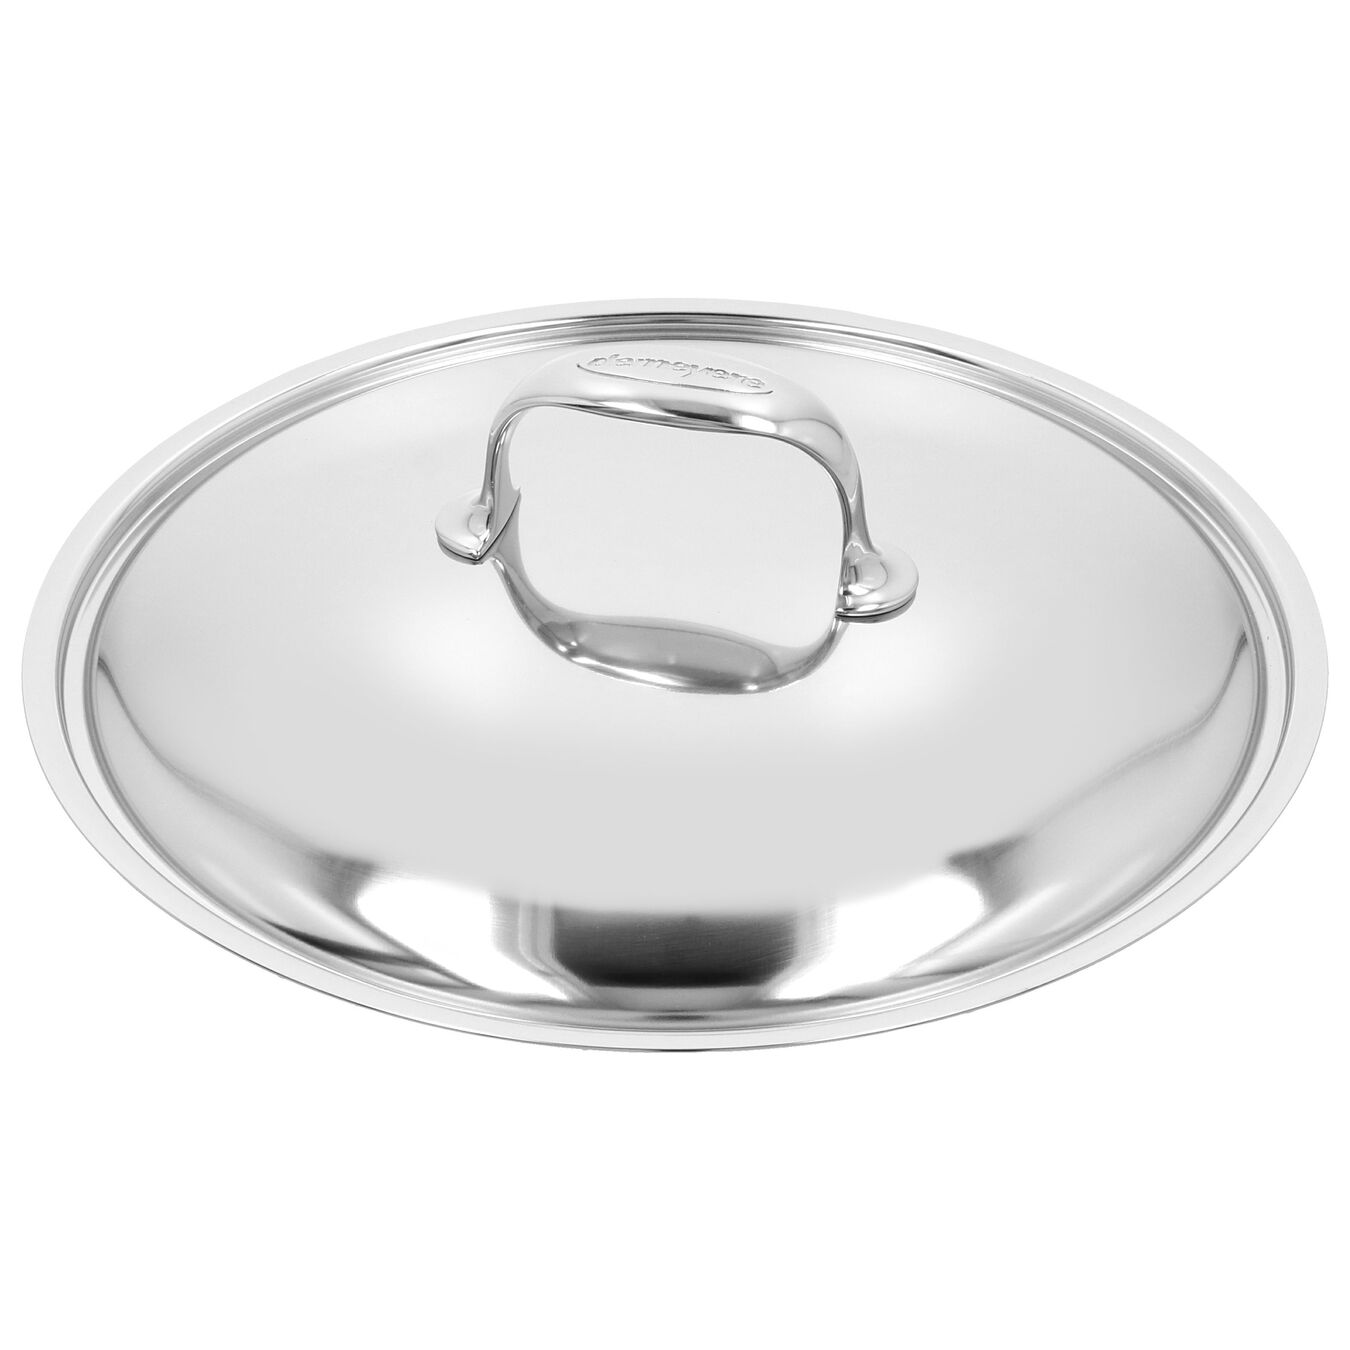 28 cm round 18/10 Stainless Steel Saute pan with lid silver,,large 3